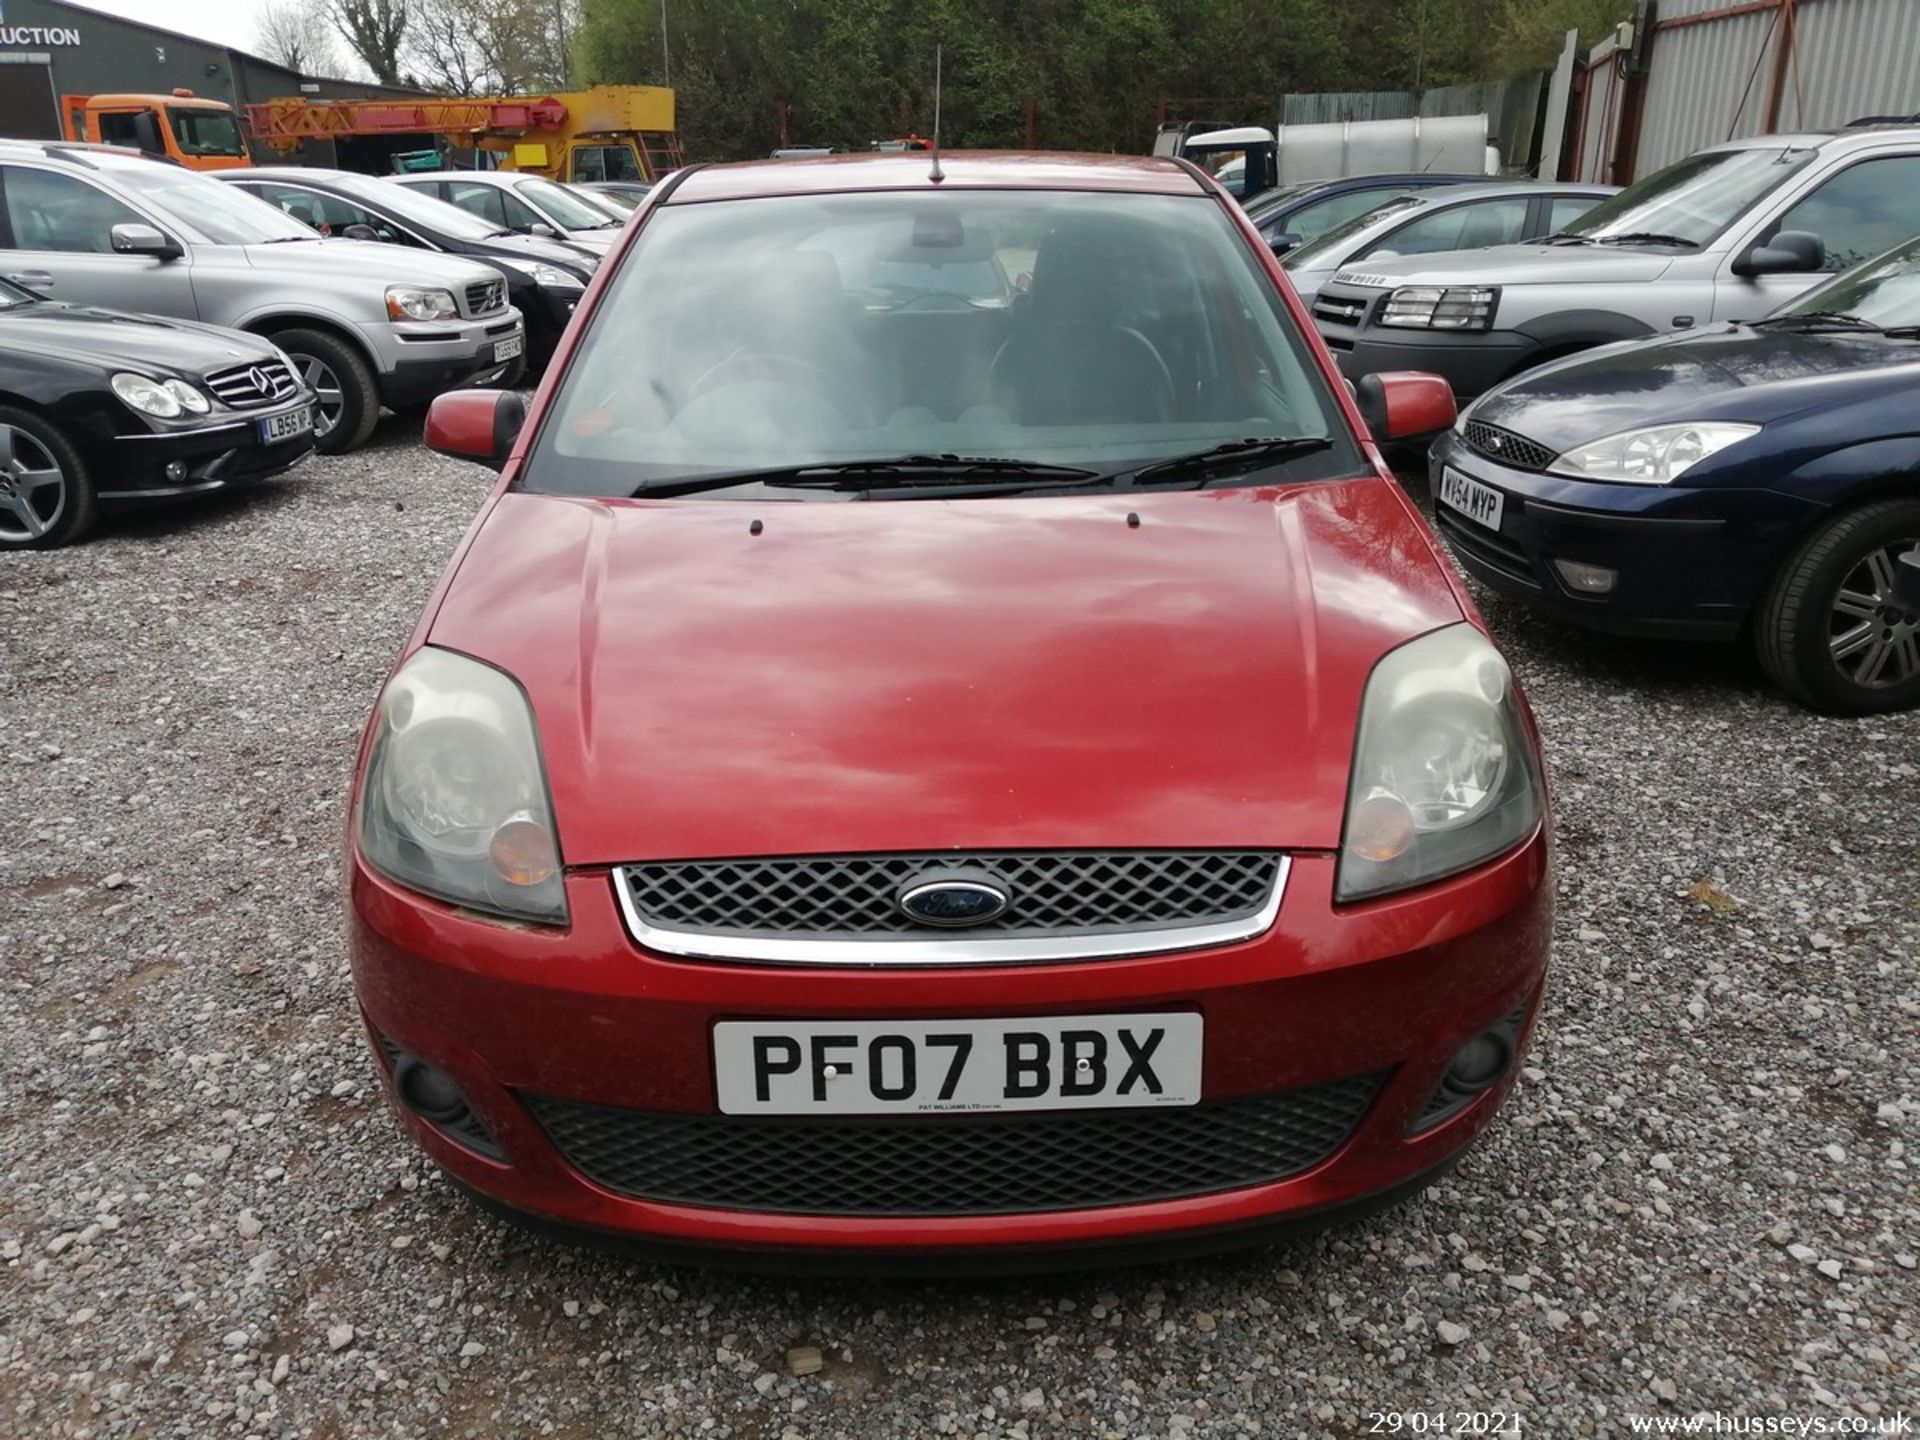 07/07 FORD FIESTA GHIA TDCI - 1399cc 5dr Hatchback (Red, 111k) - Image 2 of 11